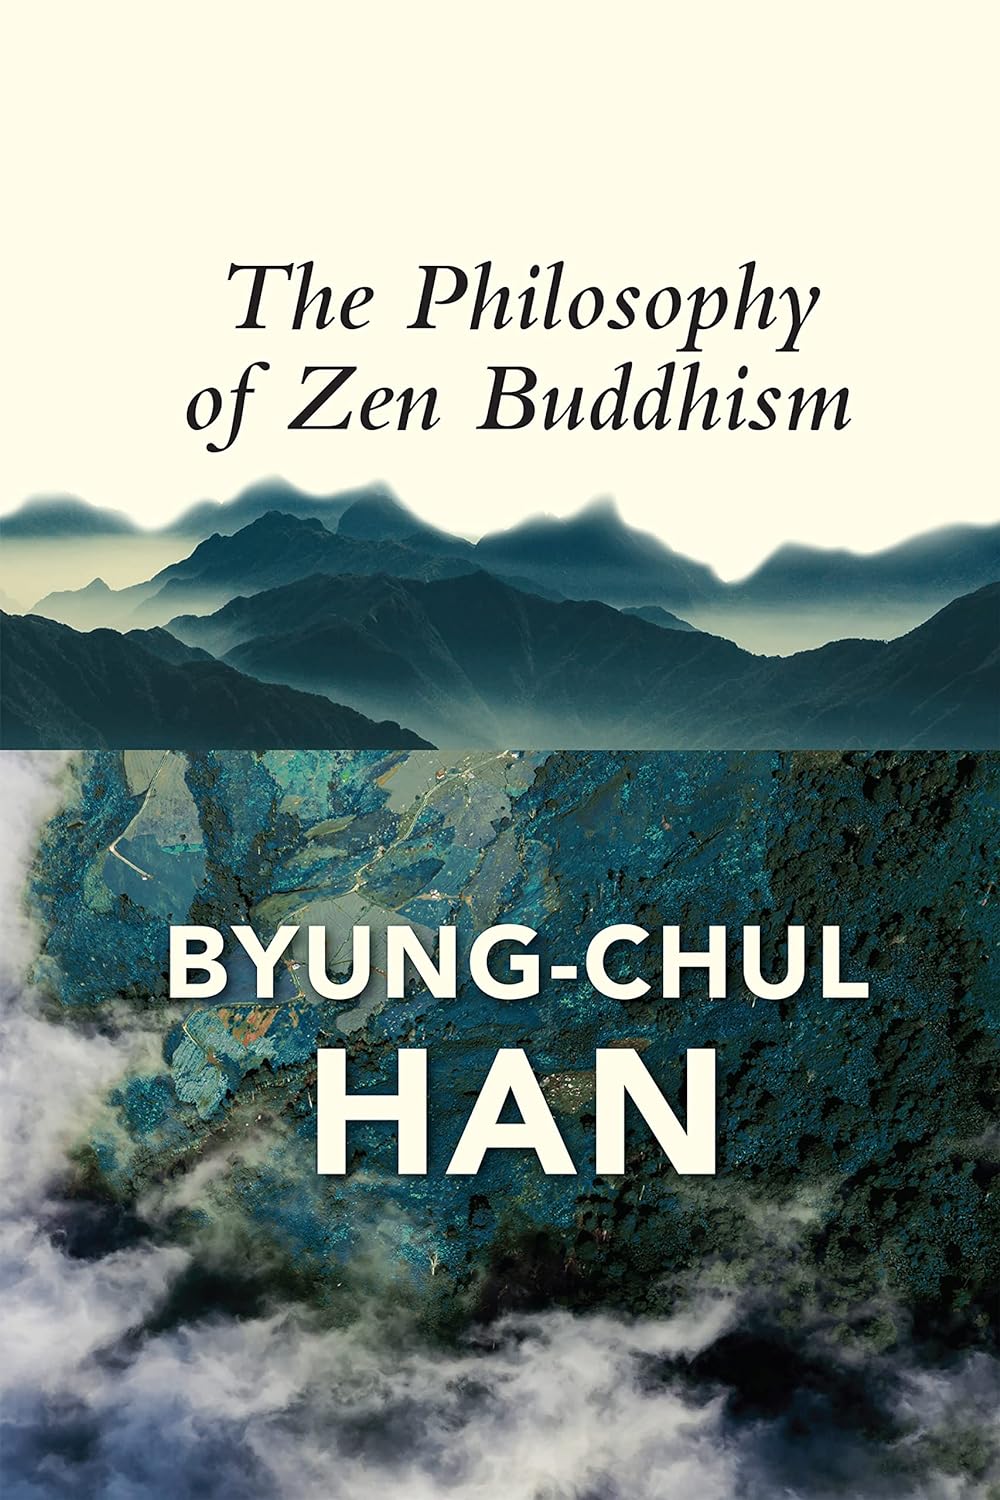 The Philosophy of Zen Buddhism – Byung-Chul Han and Daniel Steuer